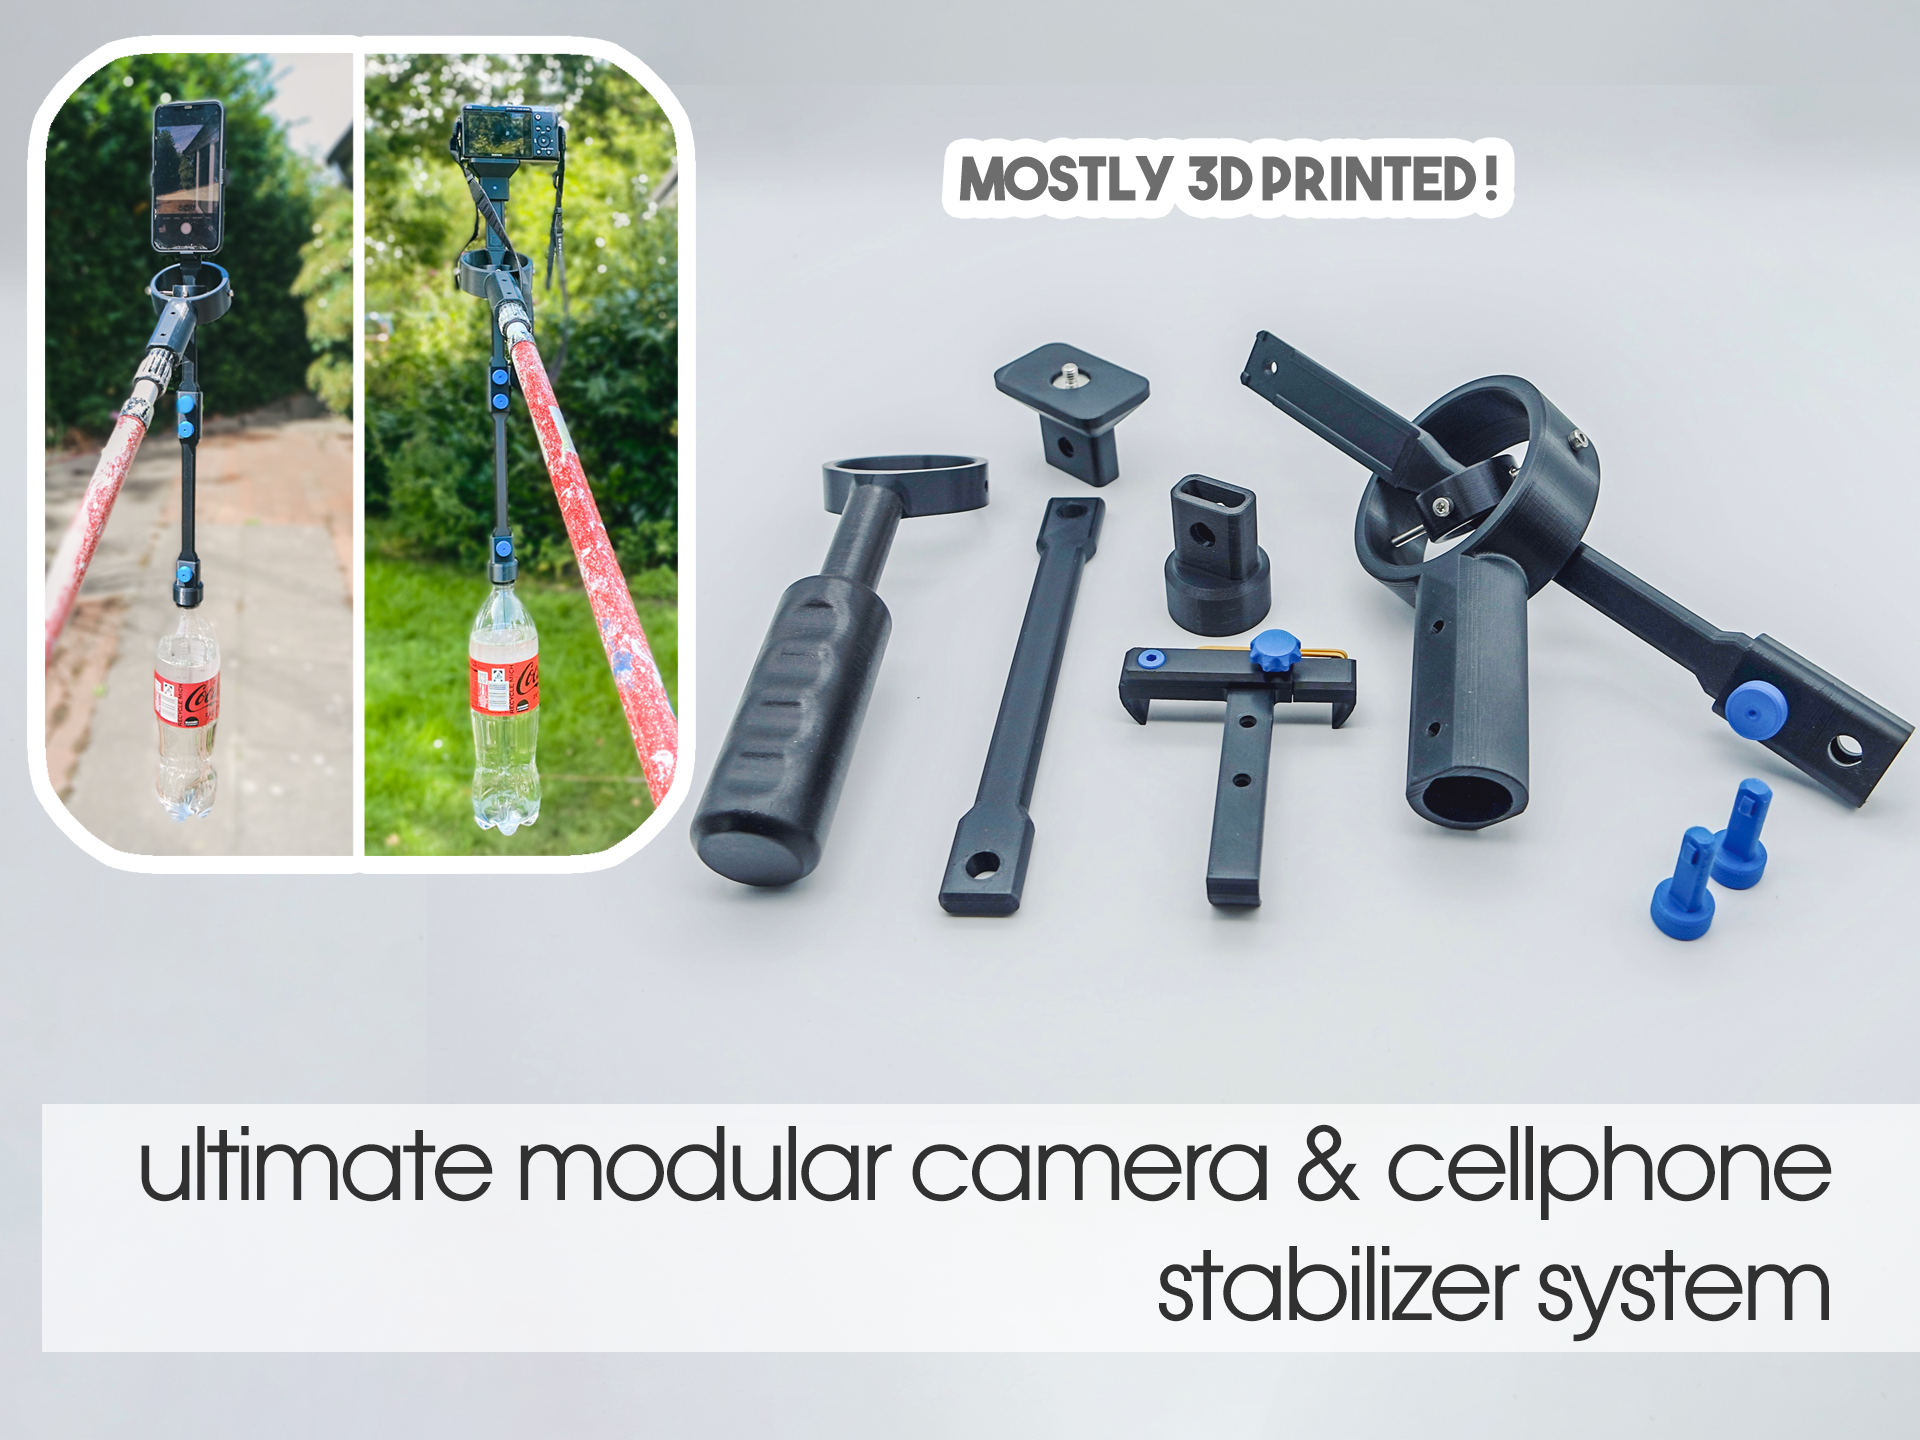 Mostly 3D-printed Ultimate Modular Camera & Cellphone Stabilizer System - mounted to standard painting rods